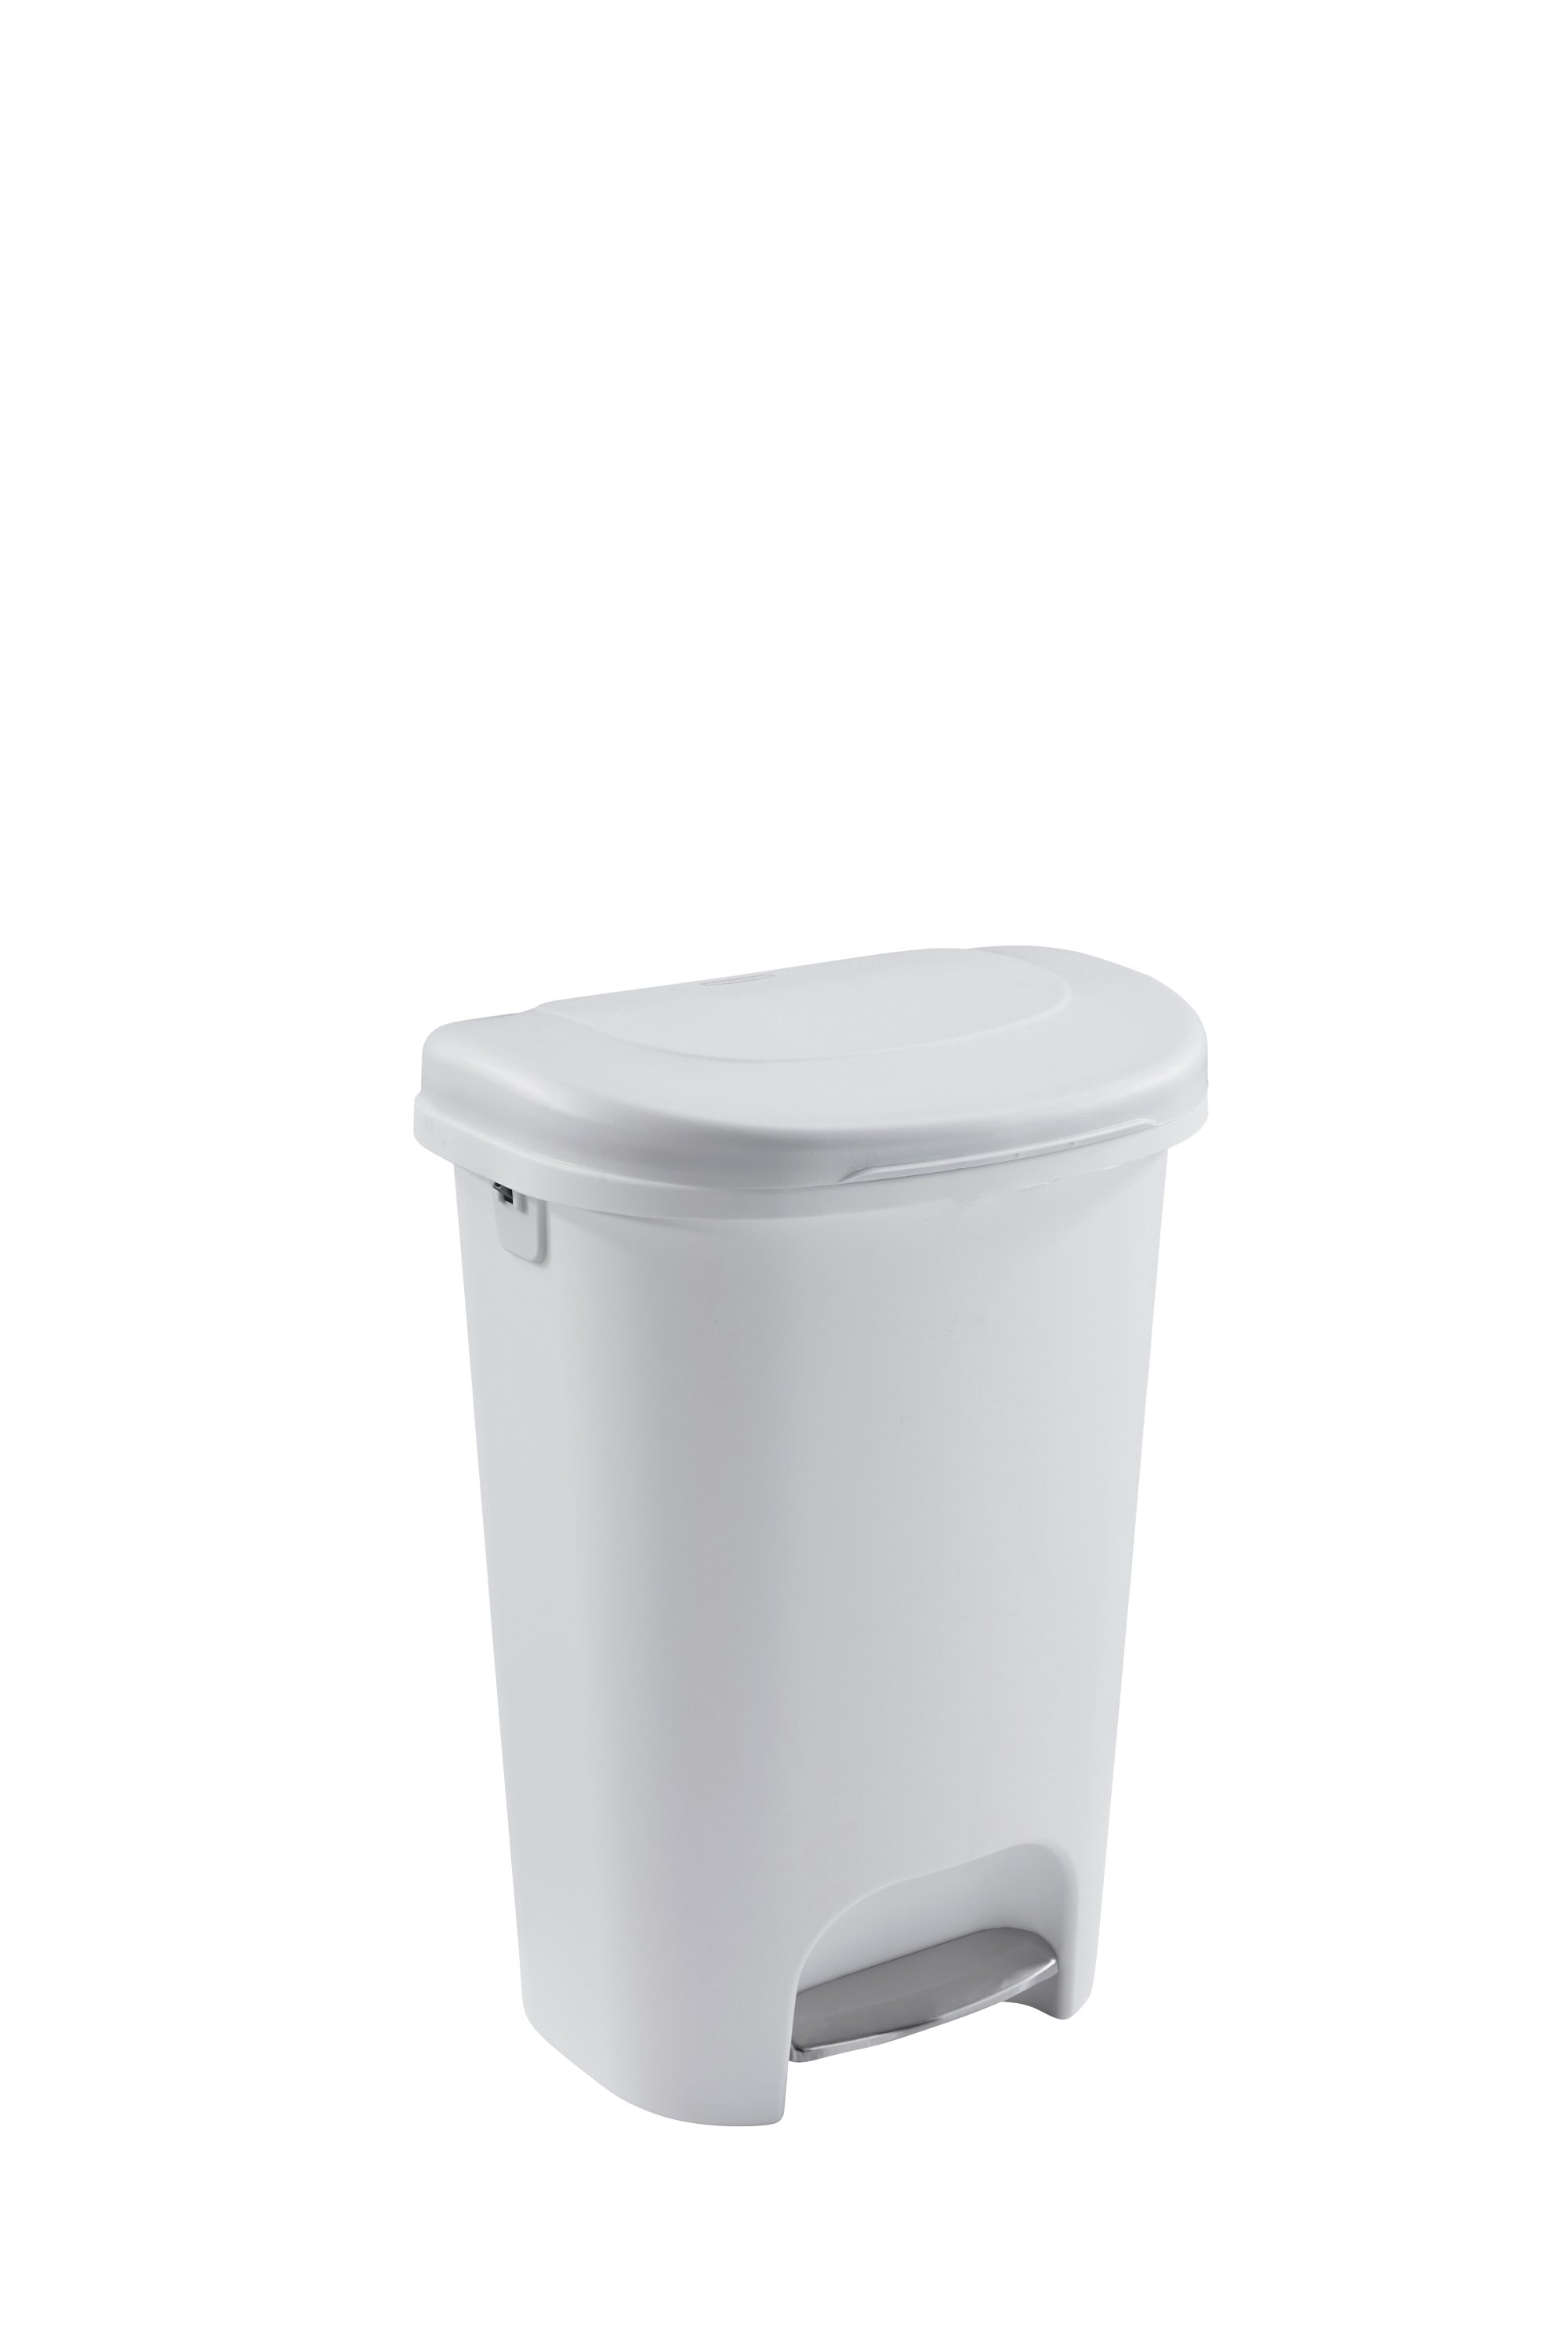 Rubbermaid Spring Top Kitchen Bathroom Trash Can with Lid, 13